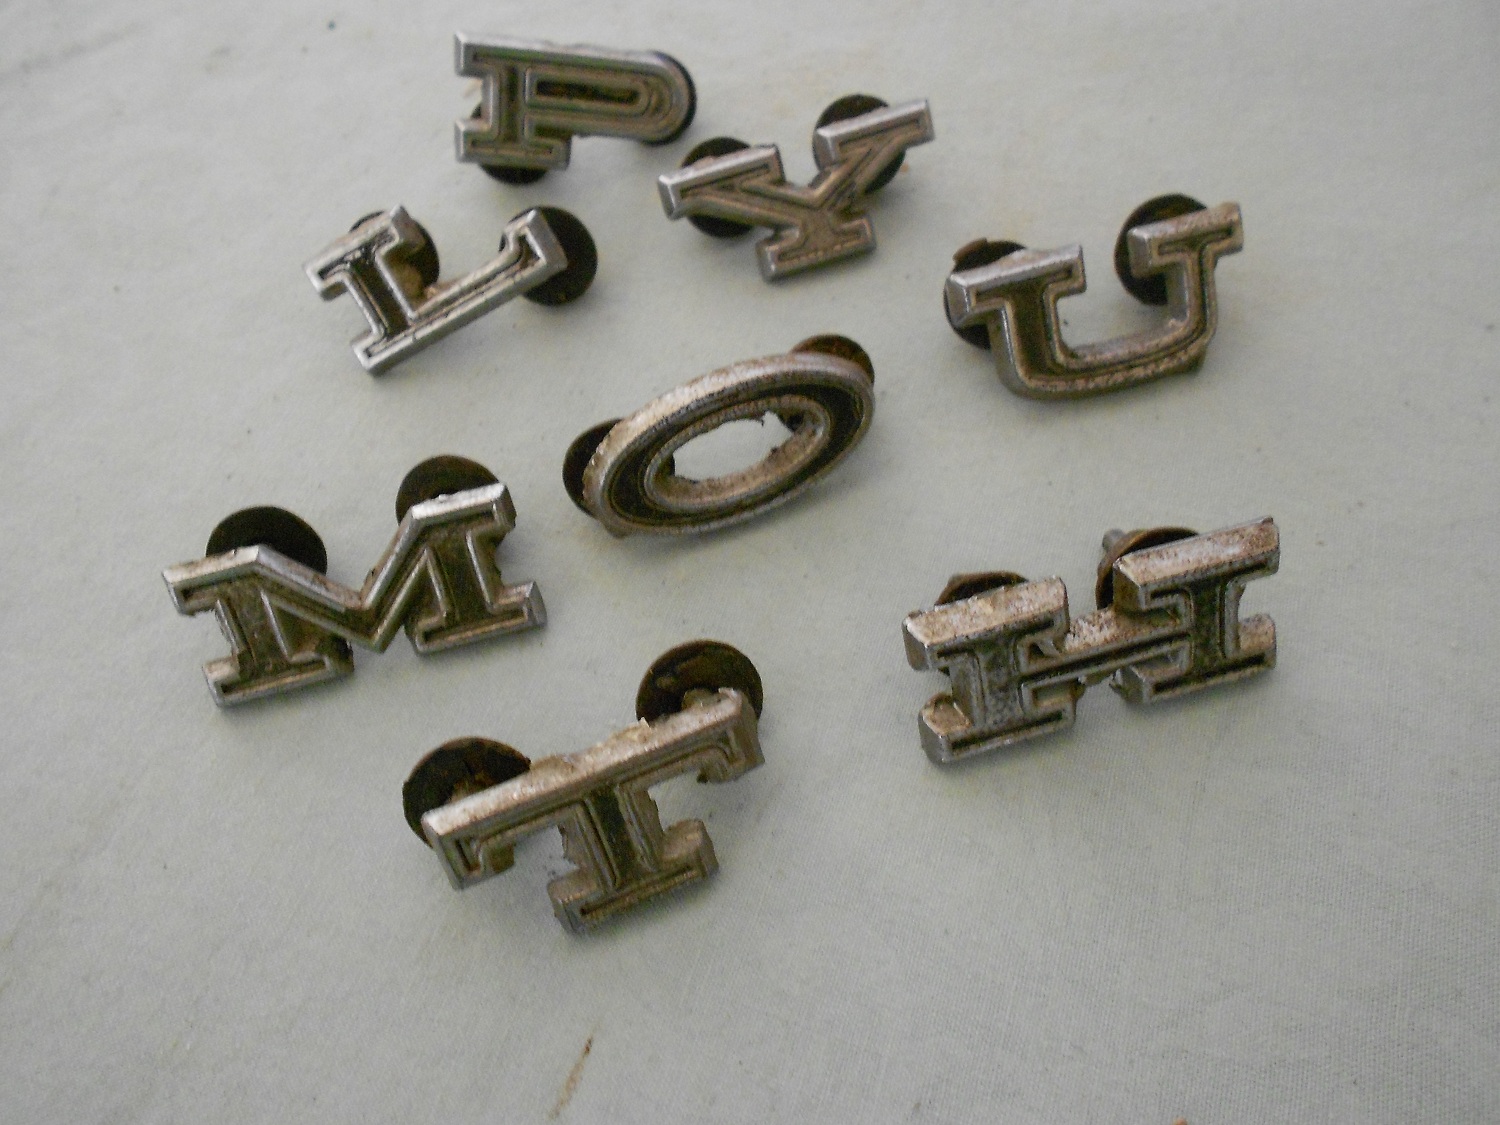 Attached picture 7255120-plymouth-70-tail-letters.jpg